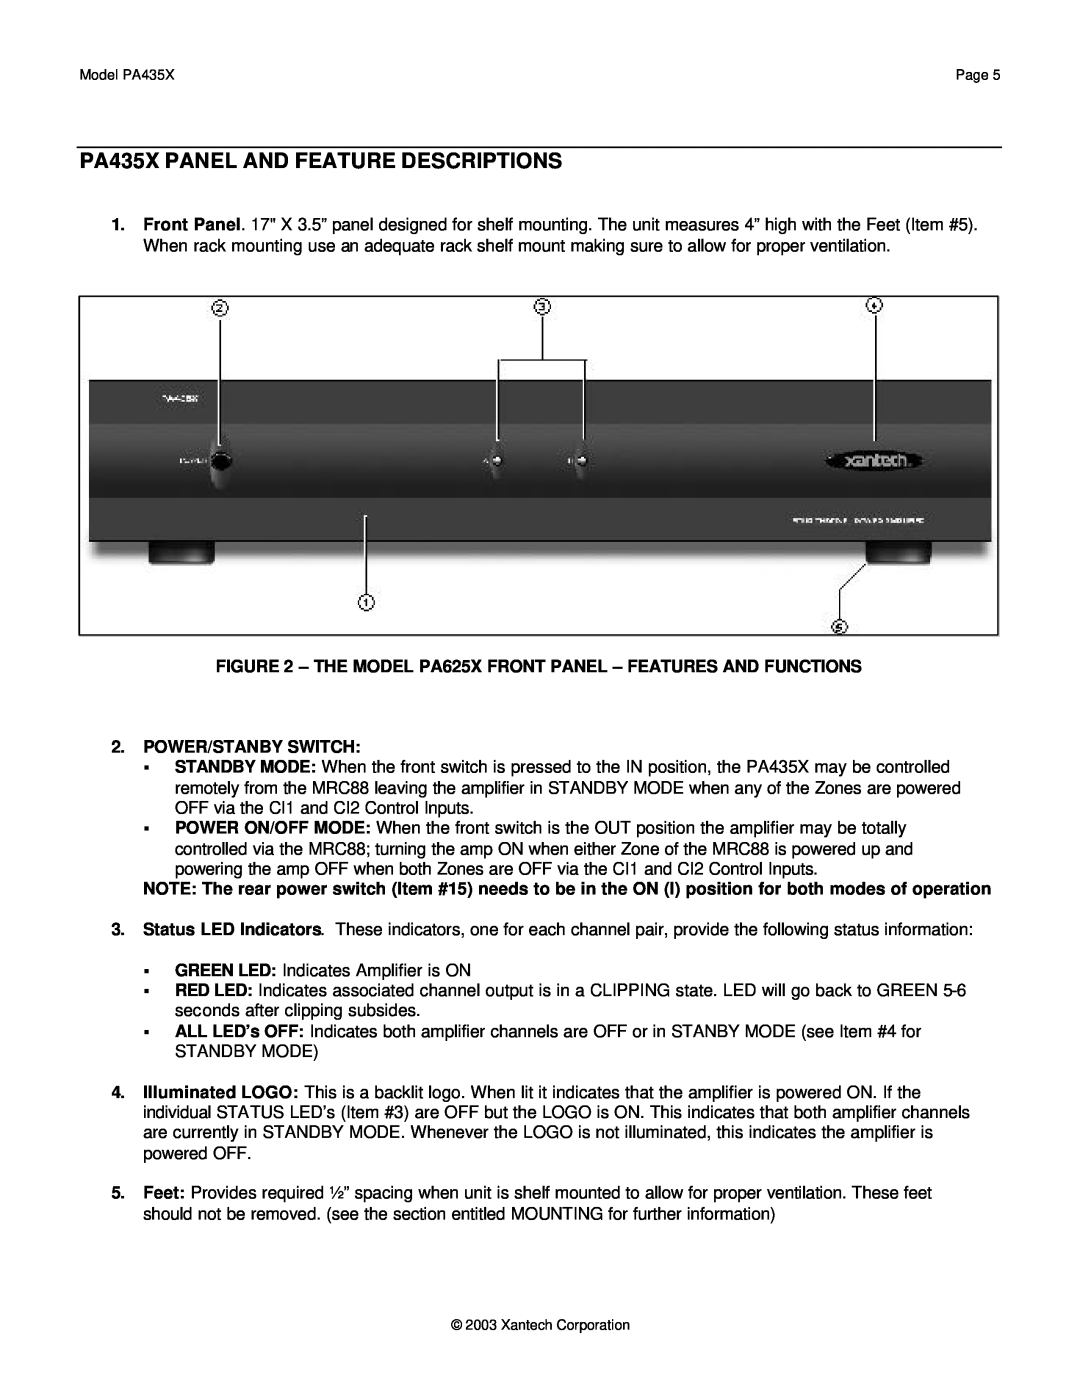 Xantech installation instructions PA435X PANEL AND FEATURE DESCRIPTIONS 